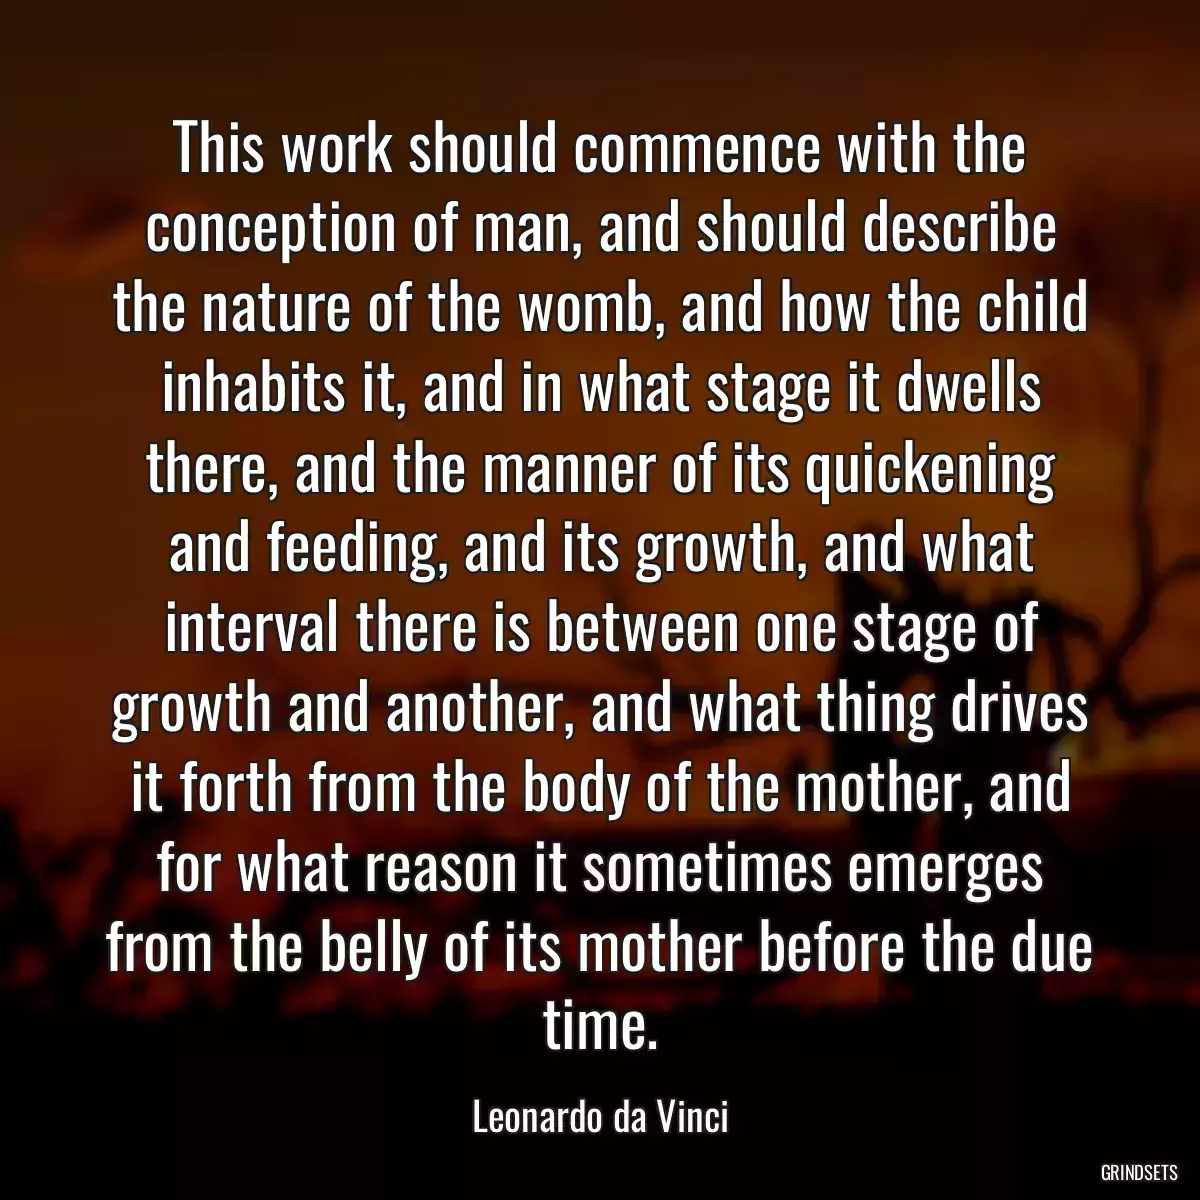 This work should commence with the conception of man, and should describe the nature of the womb, and how the child inhabits it, and in what stage it dwells there, and the manner of its quickening and feeding, and its growth, and what interval there is between one stage of growth and another, and what thing drives it forth from the body of the mother, and for what reason it sometimes emerges from the belly of its mother before the due time.